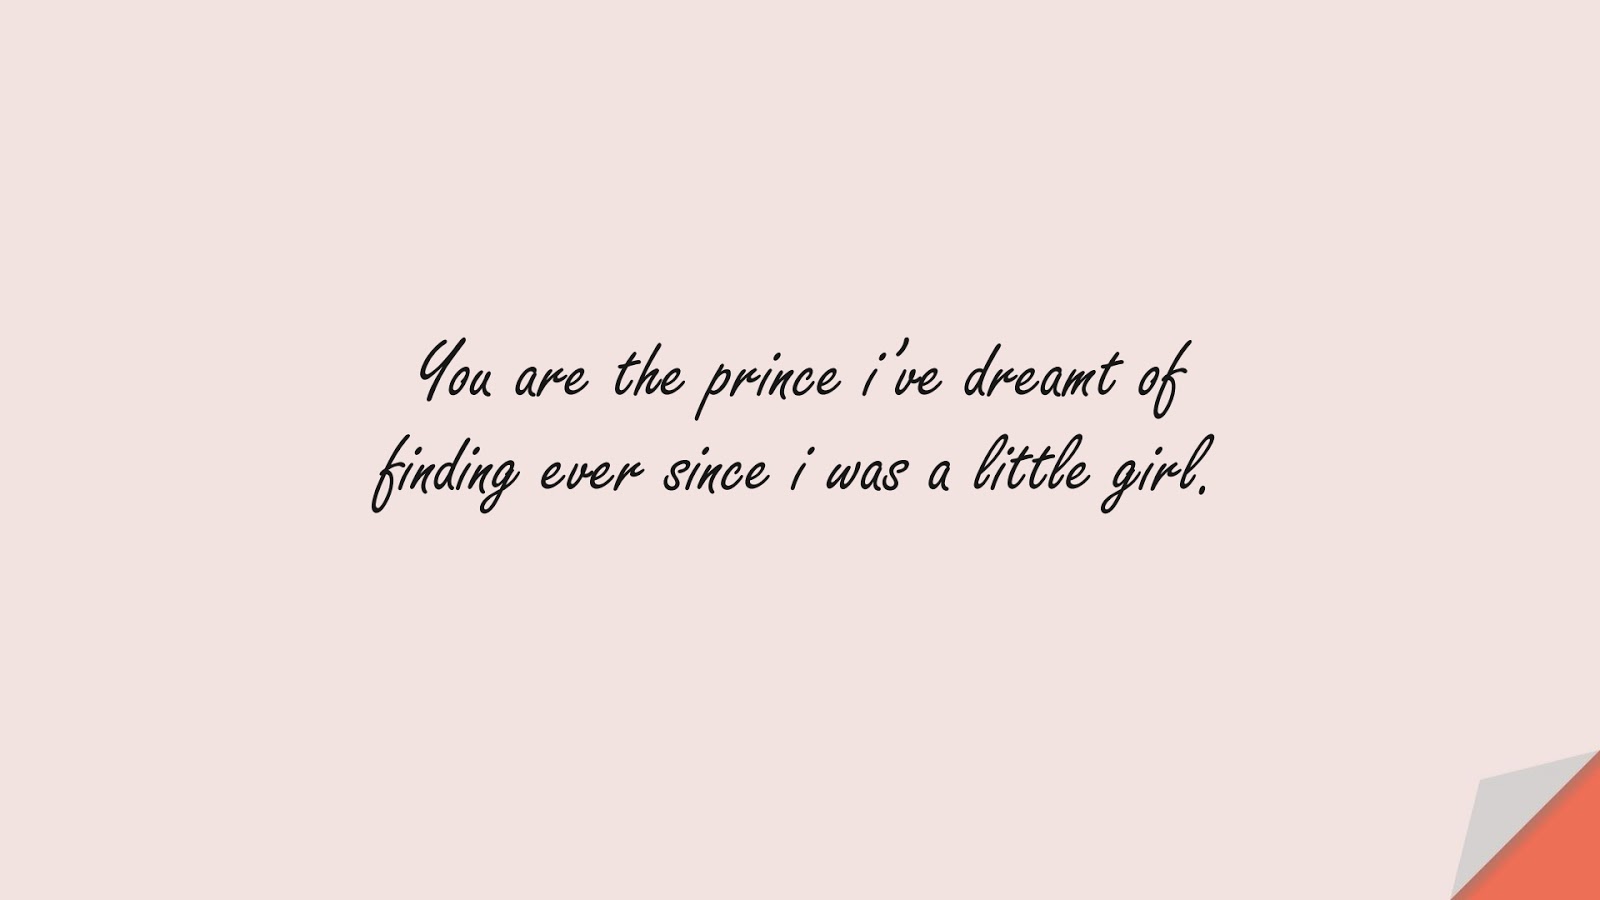 You are the prince i’ve dreamt of finding ever since i was a little girl.FALSE